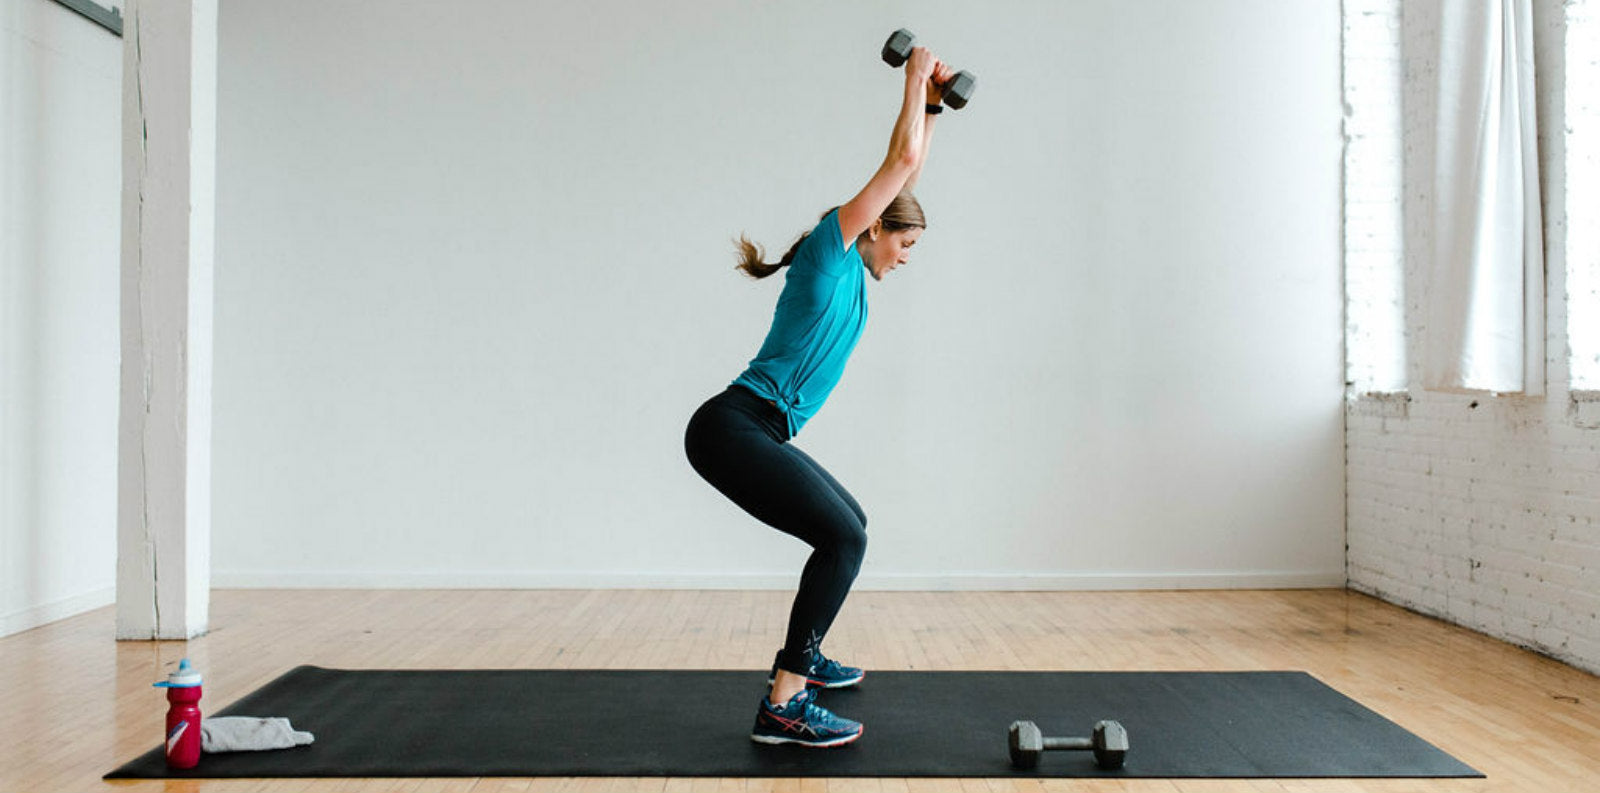 This HIIT Leg Workout Will Double as Your Cardio! - Nourish, Move, Love